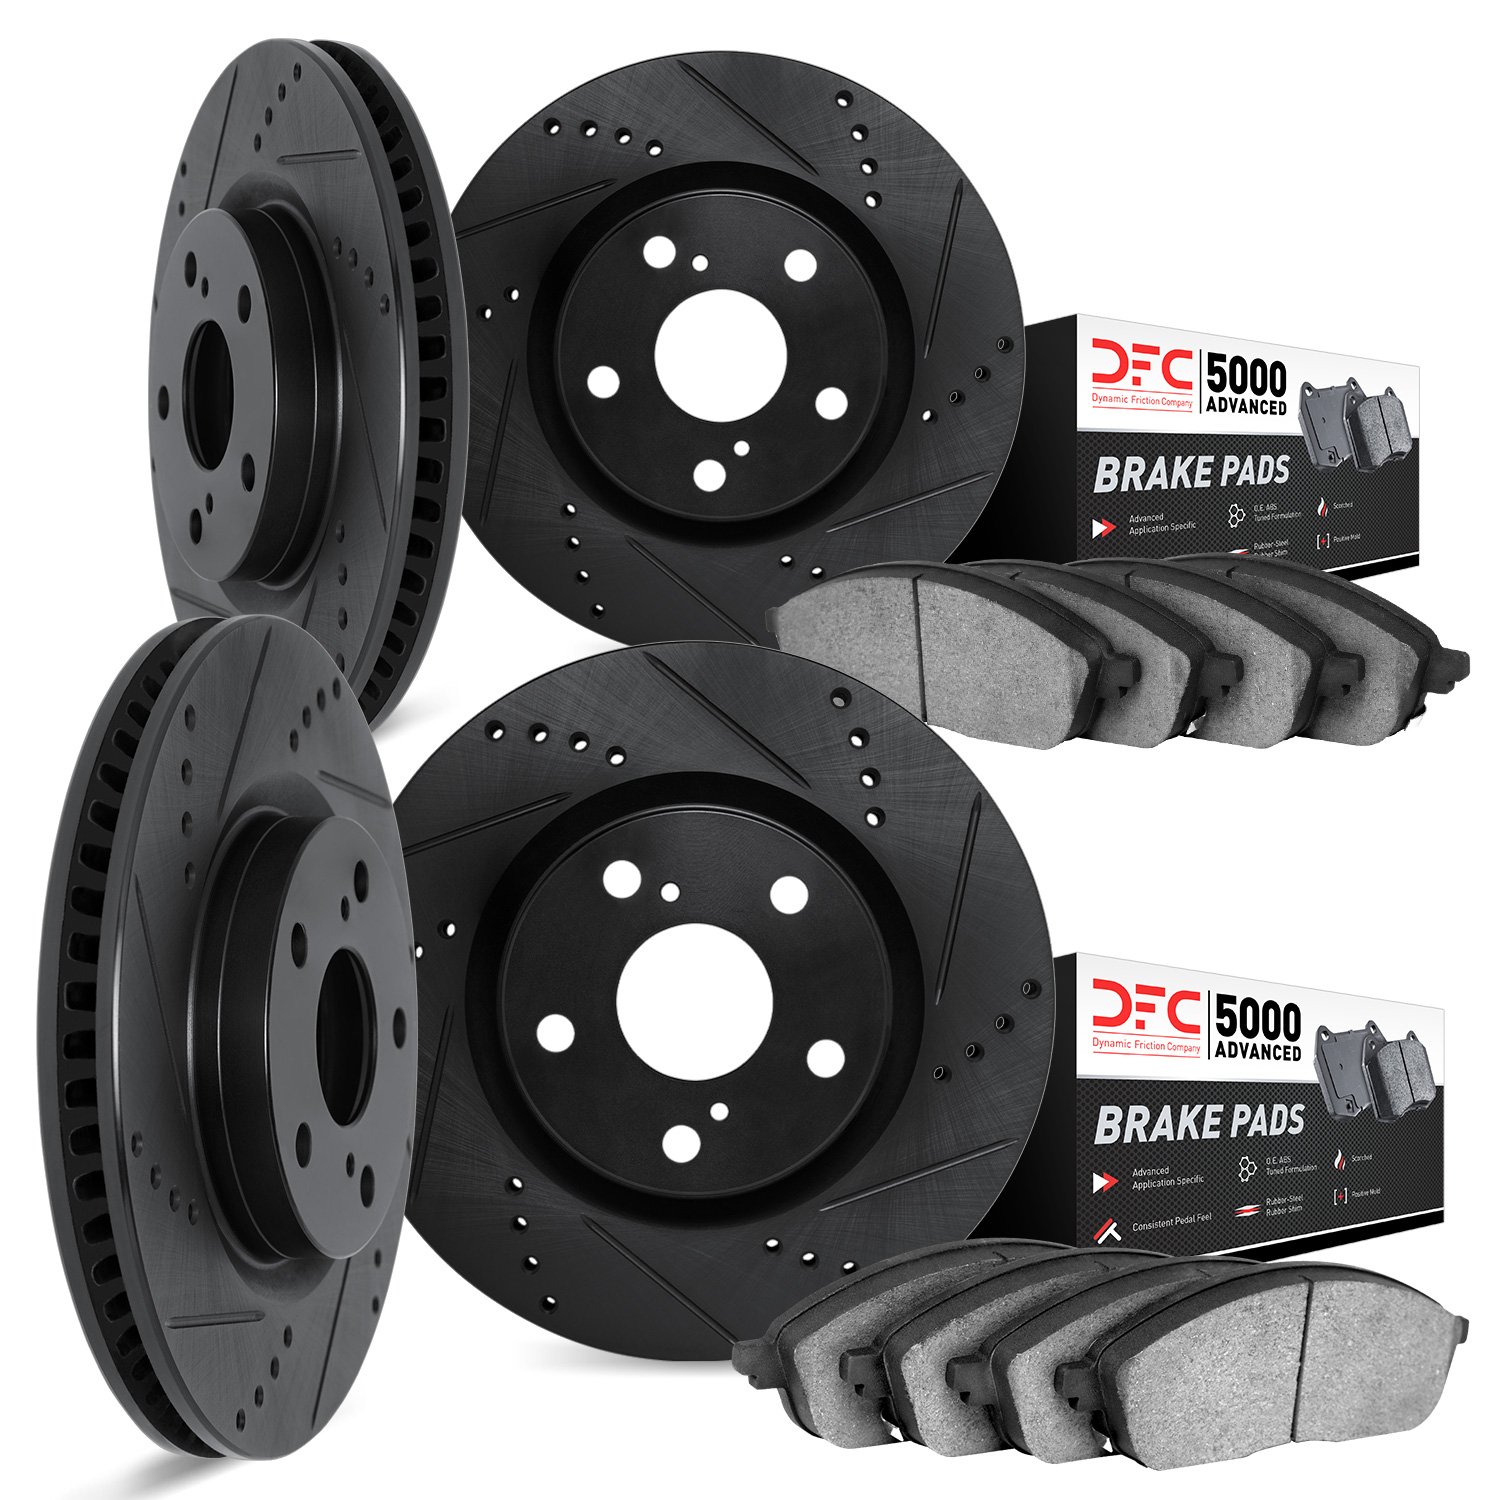 8504-11012 Drilled/Slotted Brake Rotors w/5000 Advanced Brake Pads Kit [Black], 2005-2007 Land Rover, Position: Front and Rear